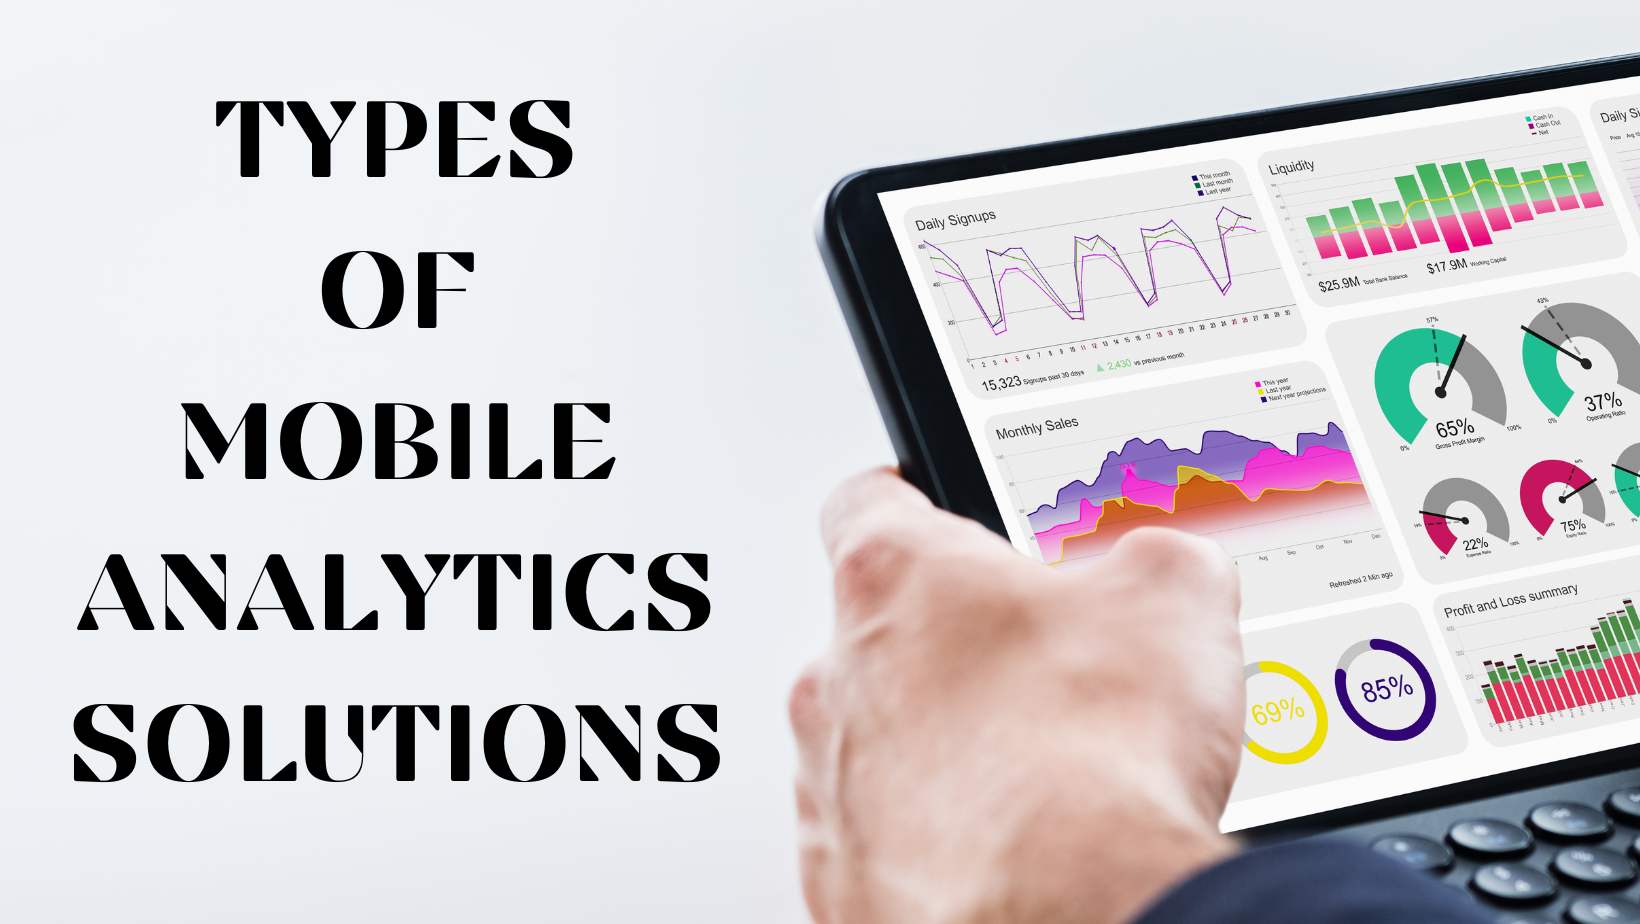 Different types of mobile analytics solutions